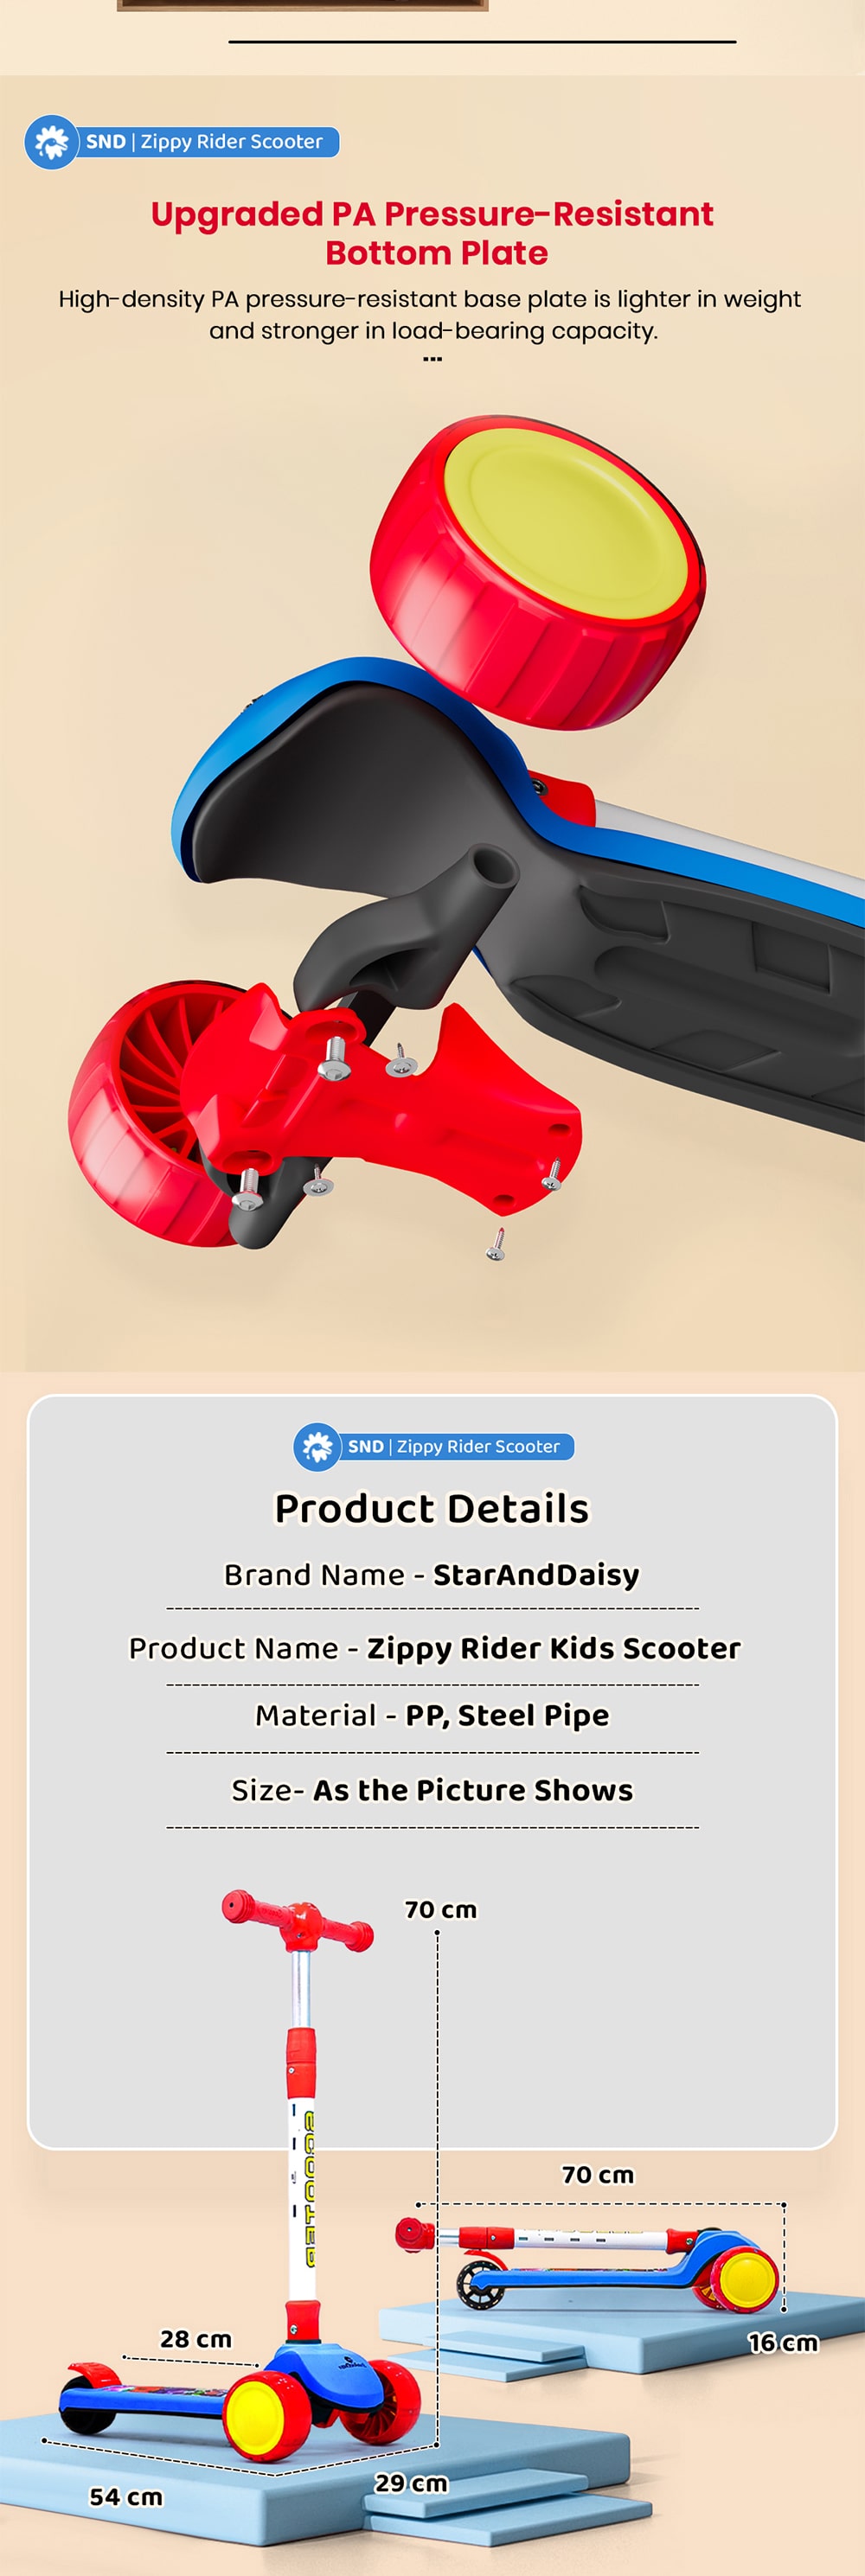 Specification of Kids Scooters